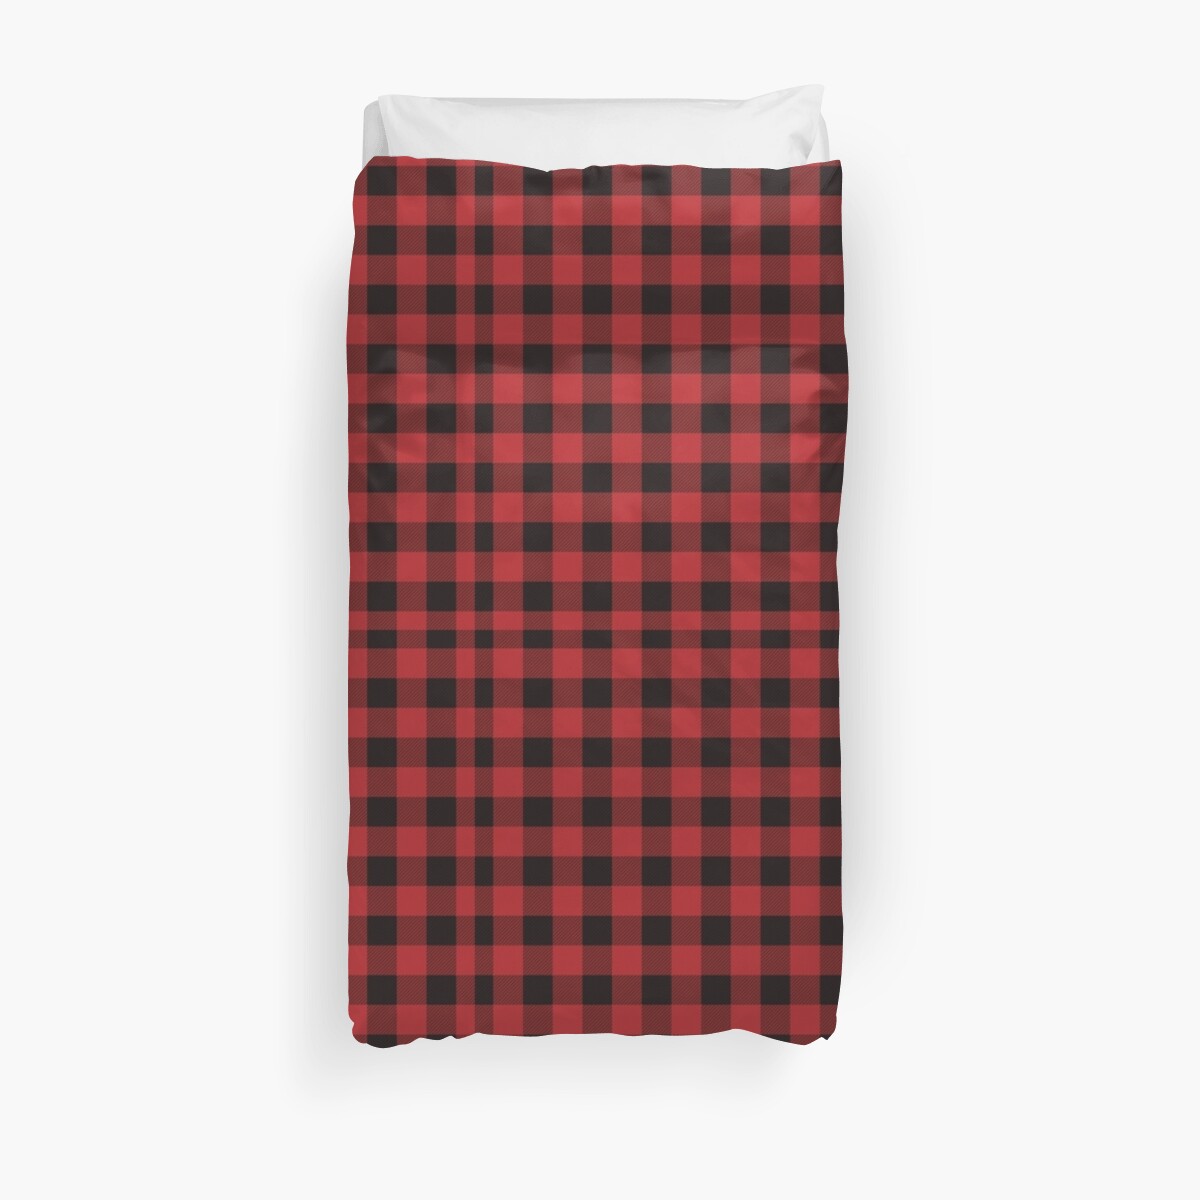 Red And Black Flannel Plaid Desigm Duvet Cover By Sometimessilent